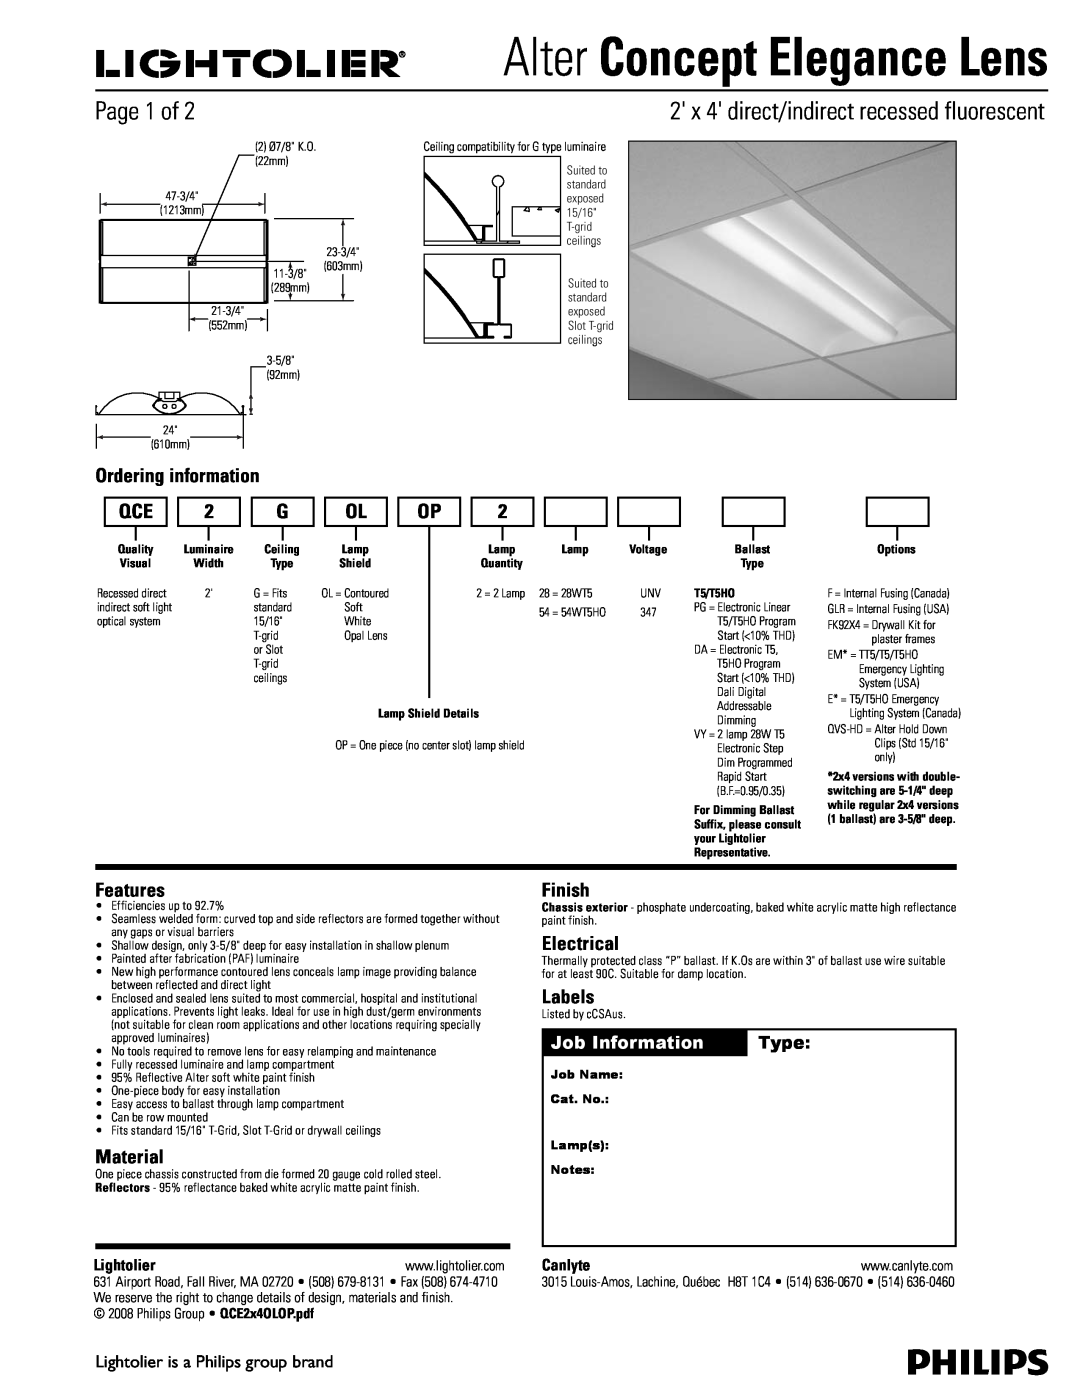 Lightolier manual Alter Concept Elegance Lens, Page 1 of, Ordering information, Features, Material, Finish, Electrical 